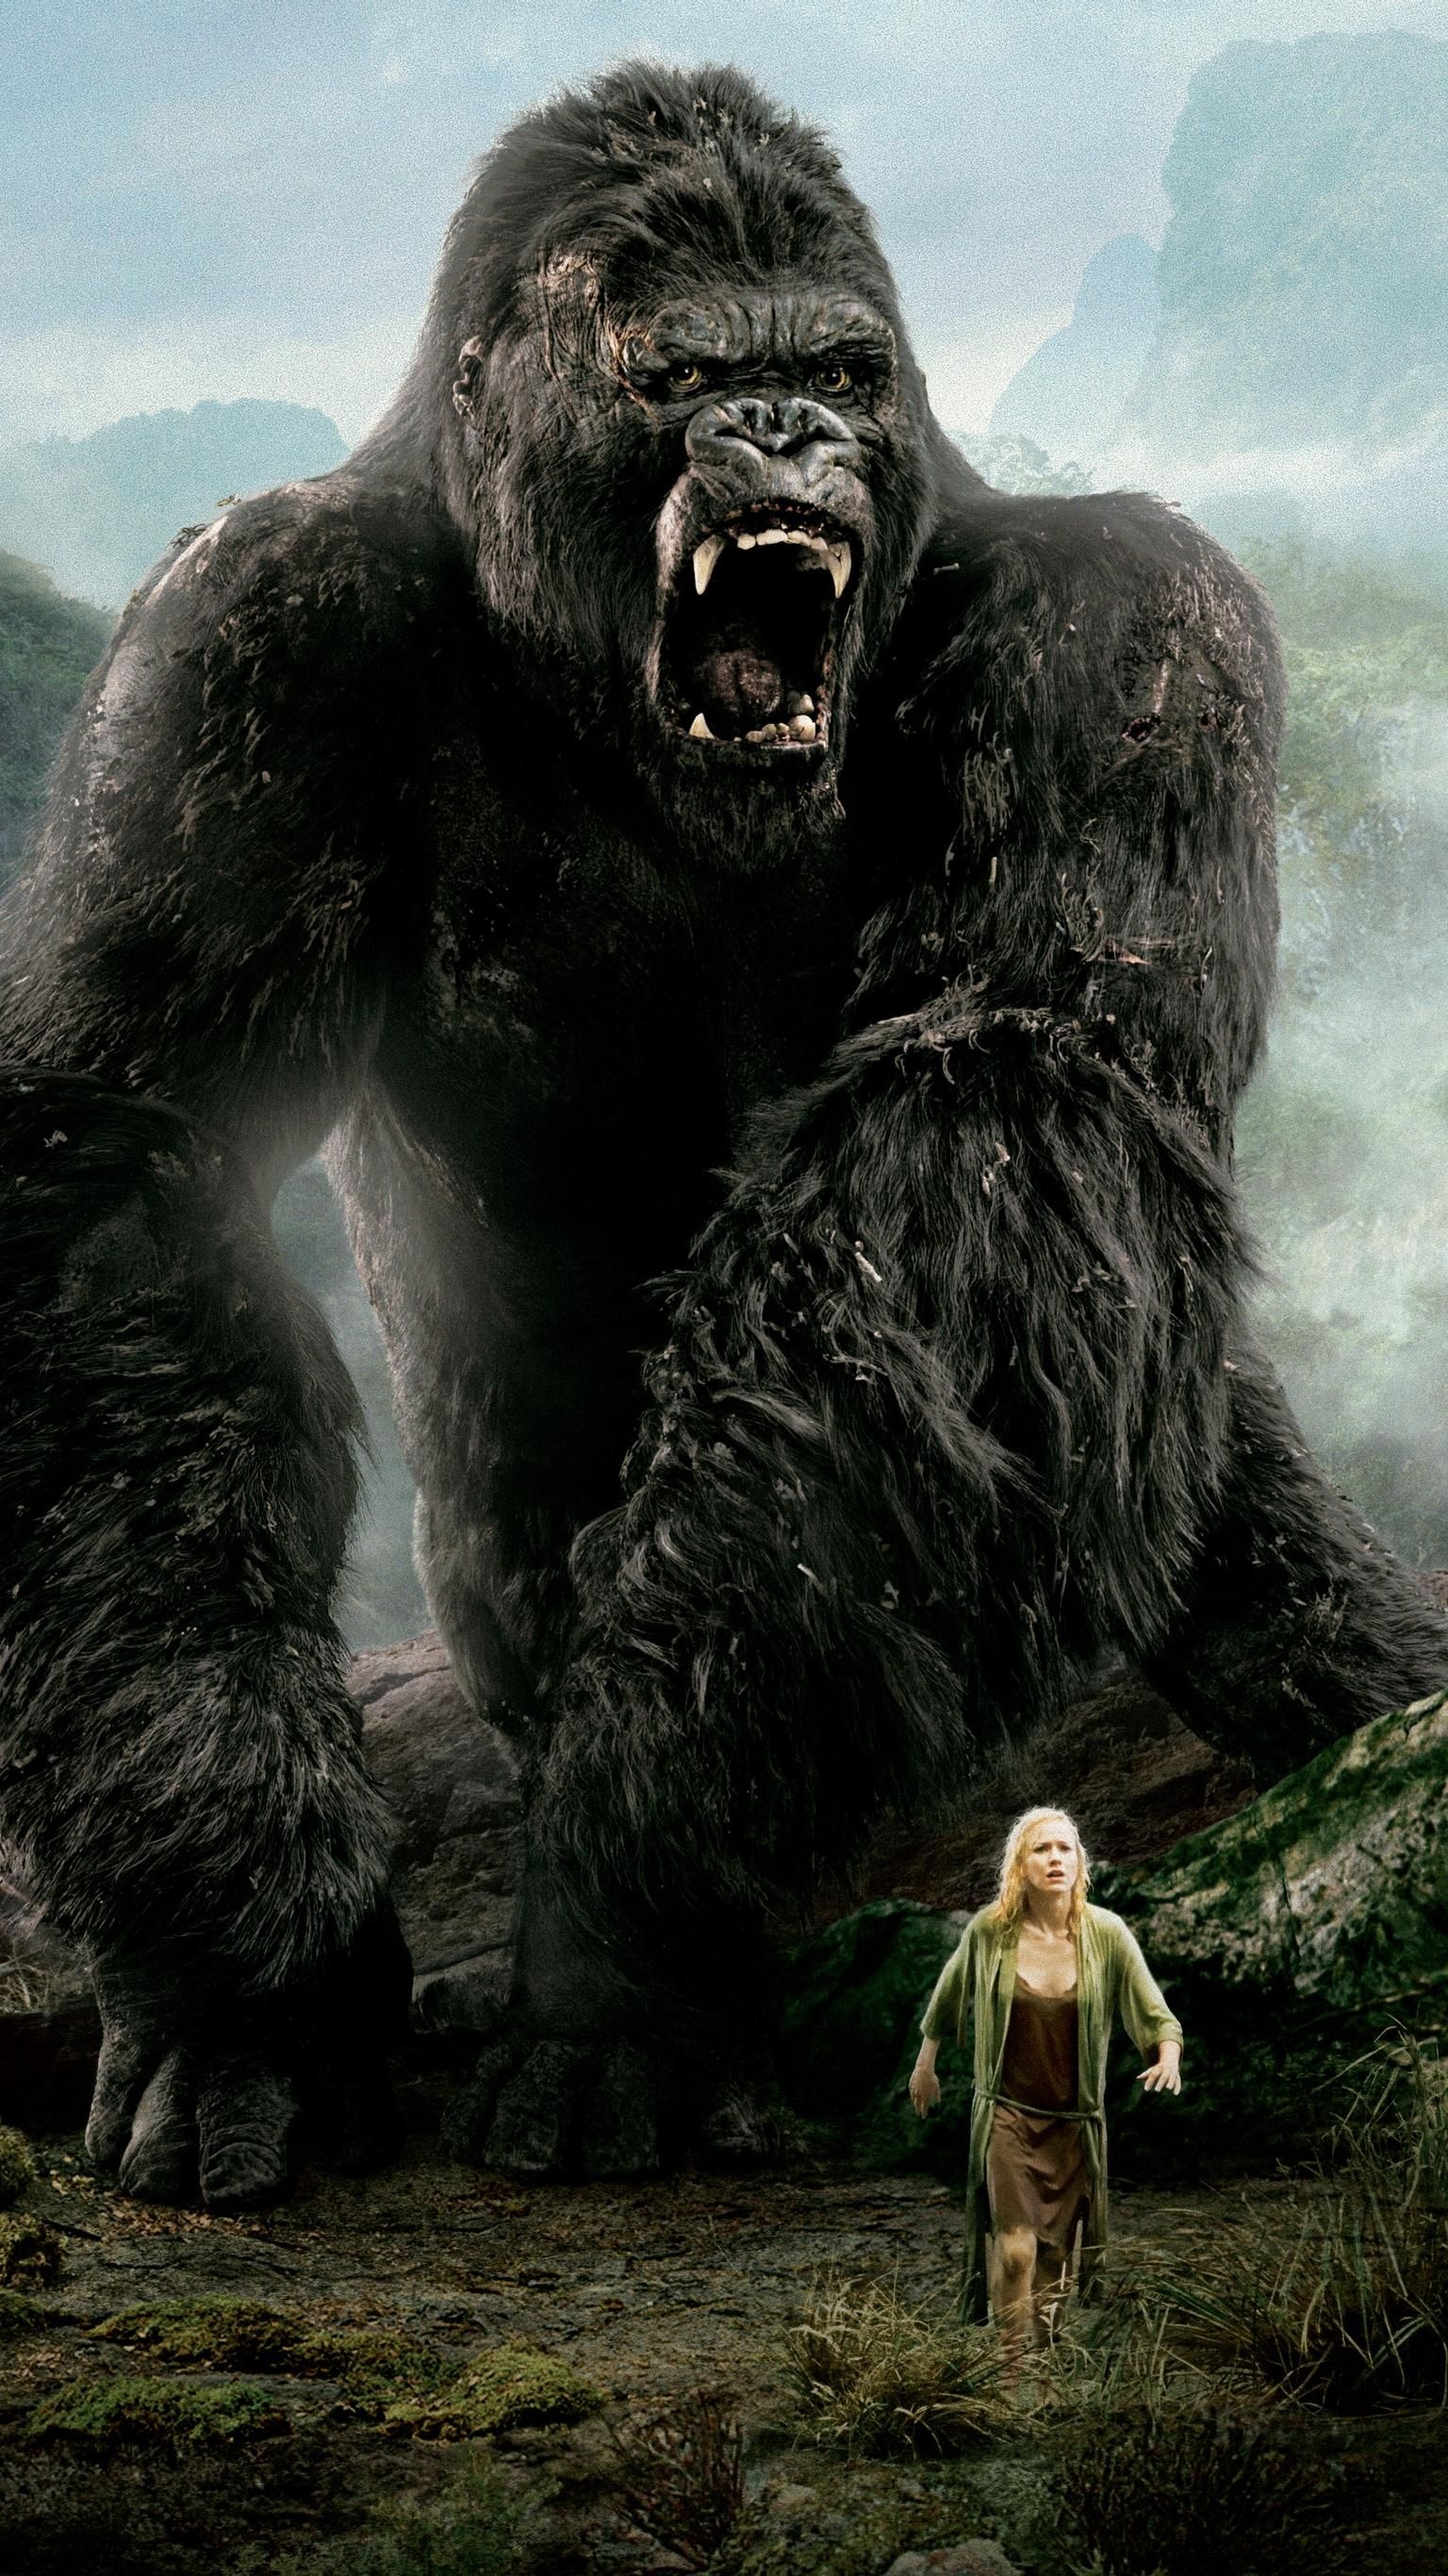 King Kong: The 2005 remake was directed by Peter Jackson and starred Naomi Watts and Jack Black. 1540x2740 HD Background.